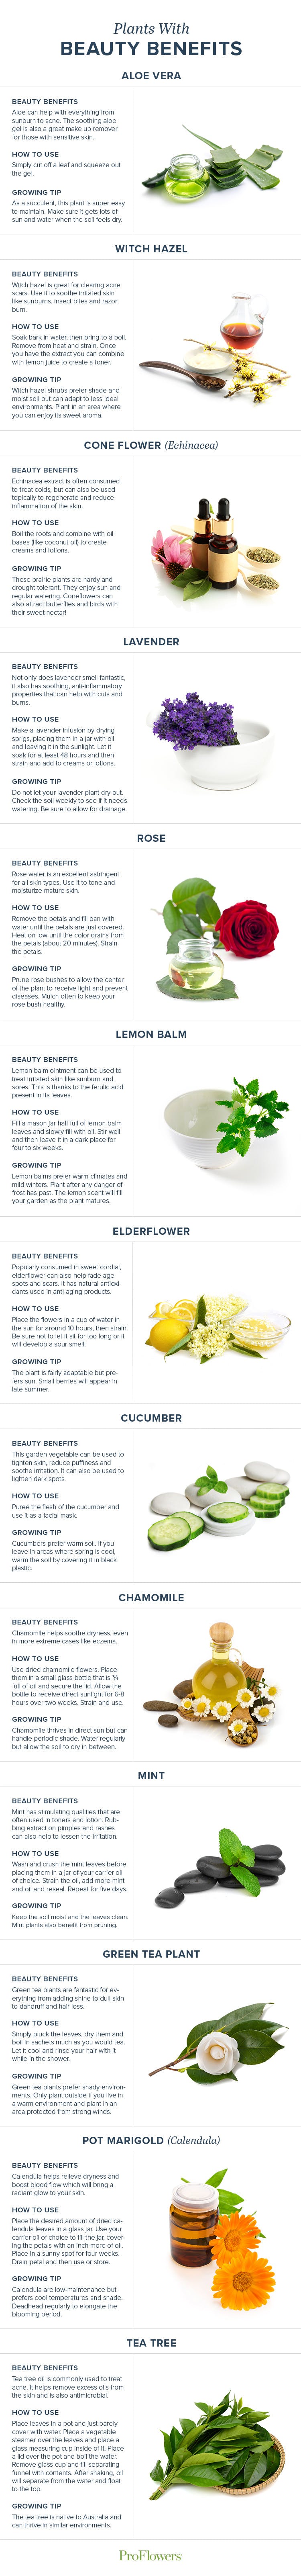 13 Plants To Help With Your Beauty Regime